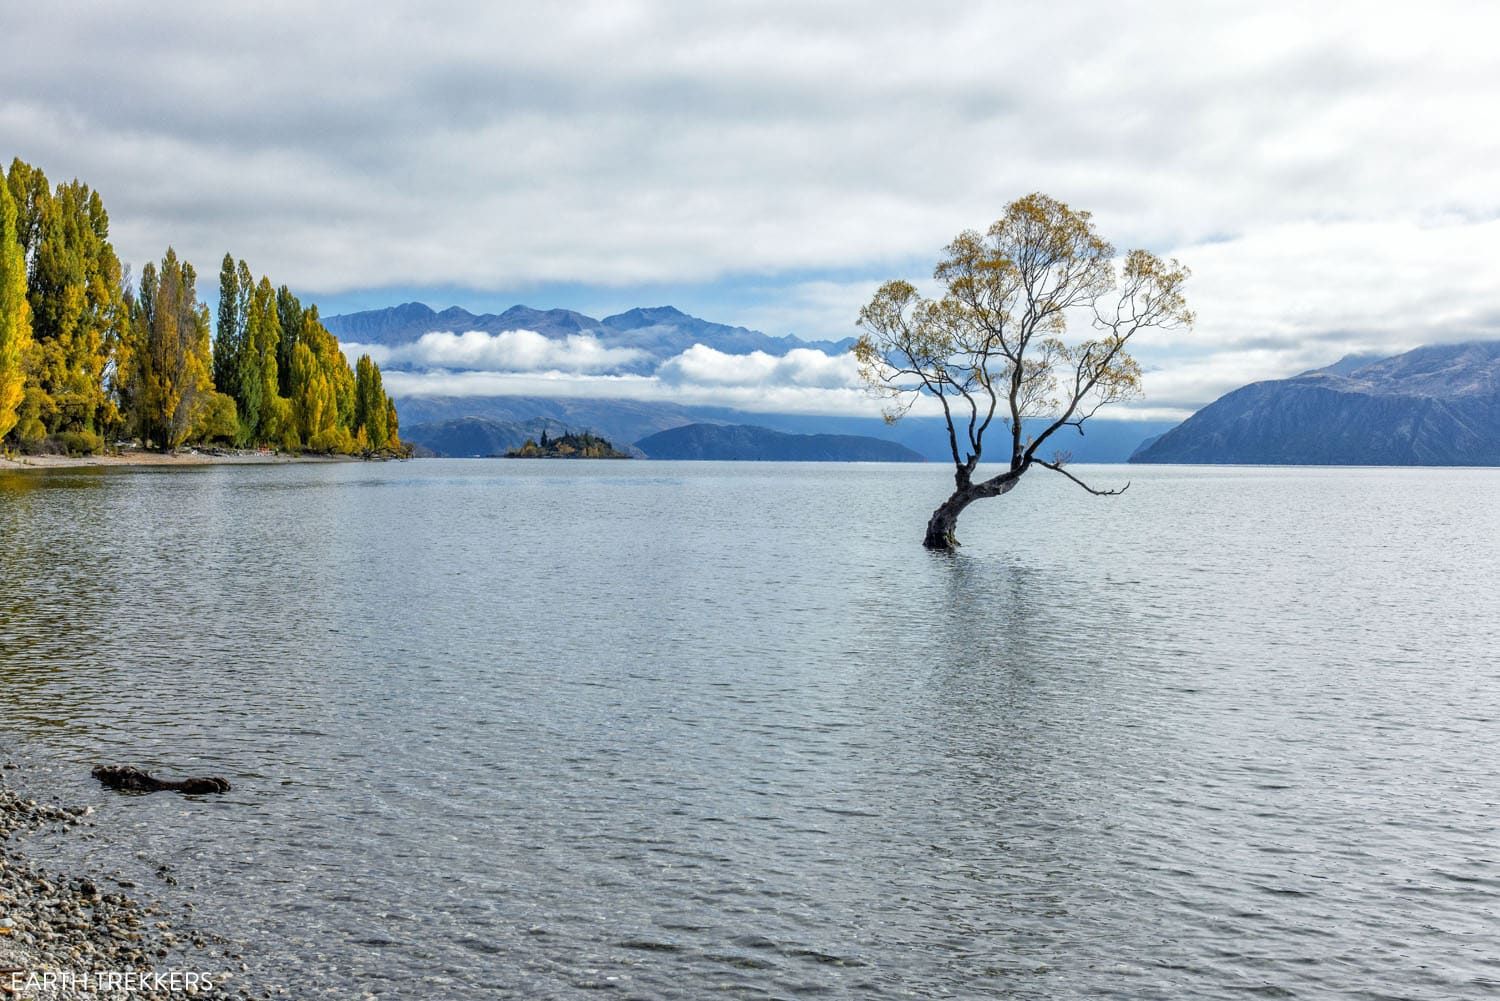 #ThatWanakaTree | Best Things to Do on the South Island